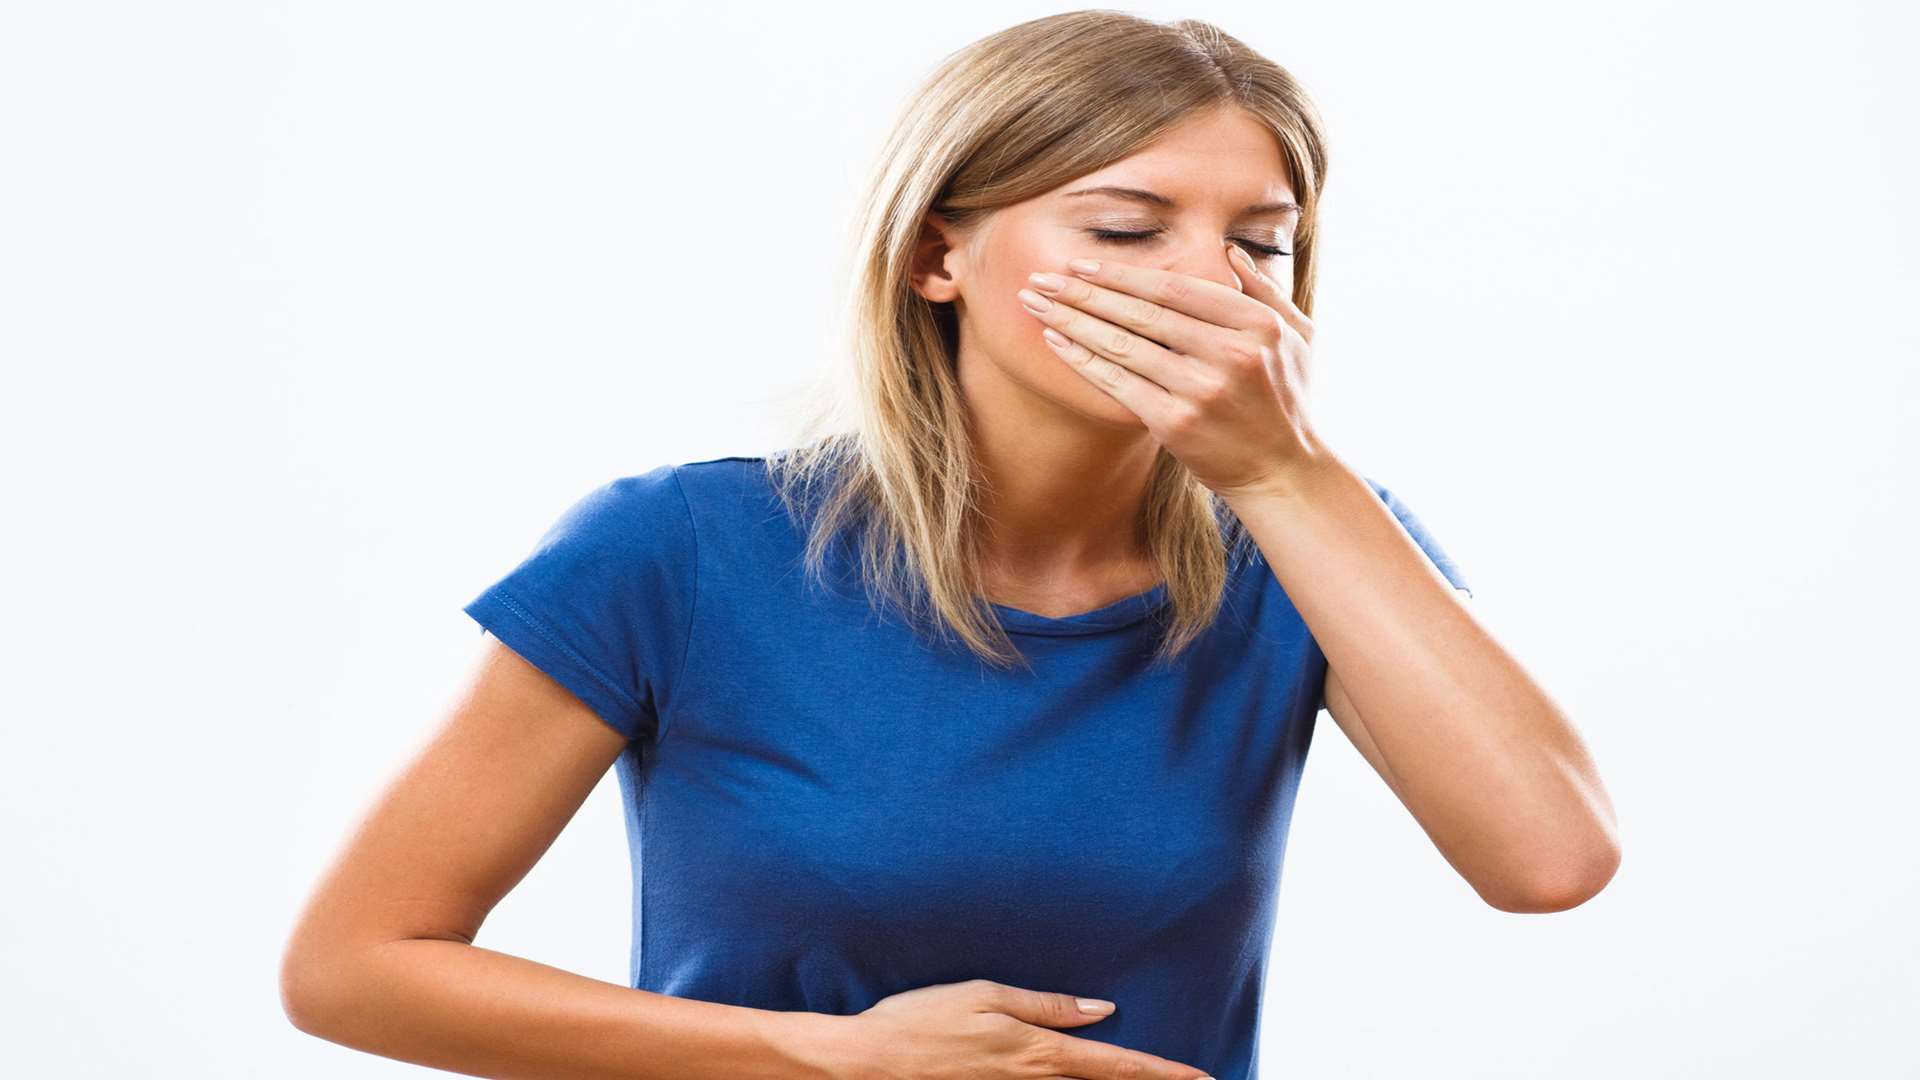 Nausea and vomiting is common in early pregnancy